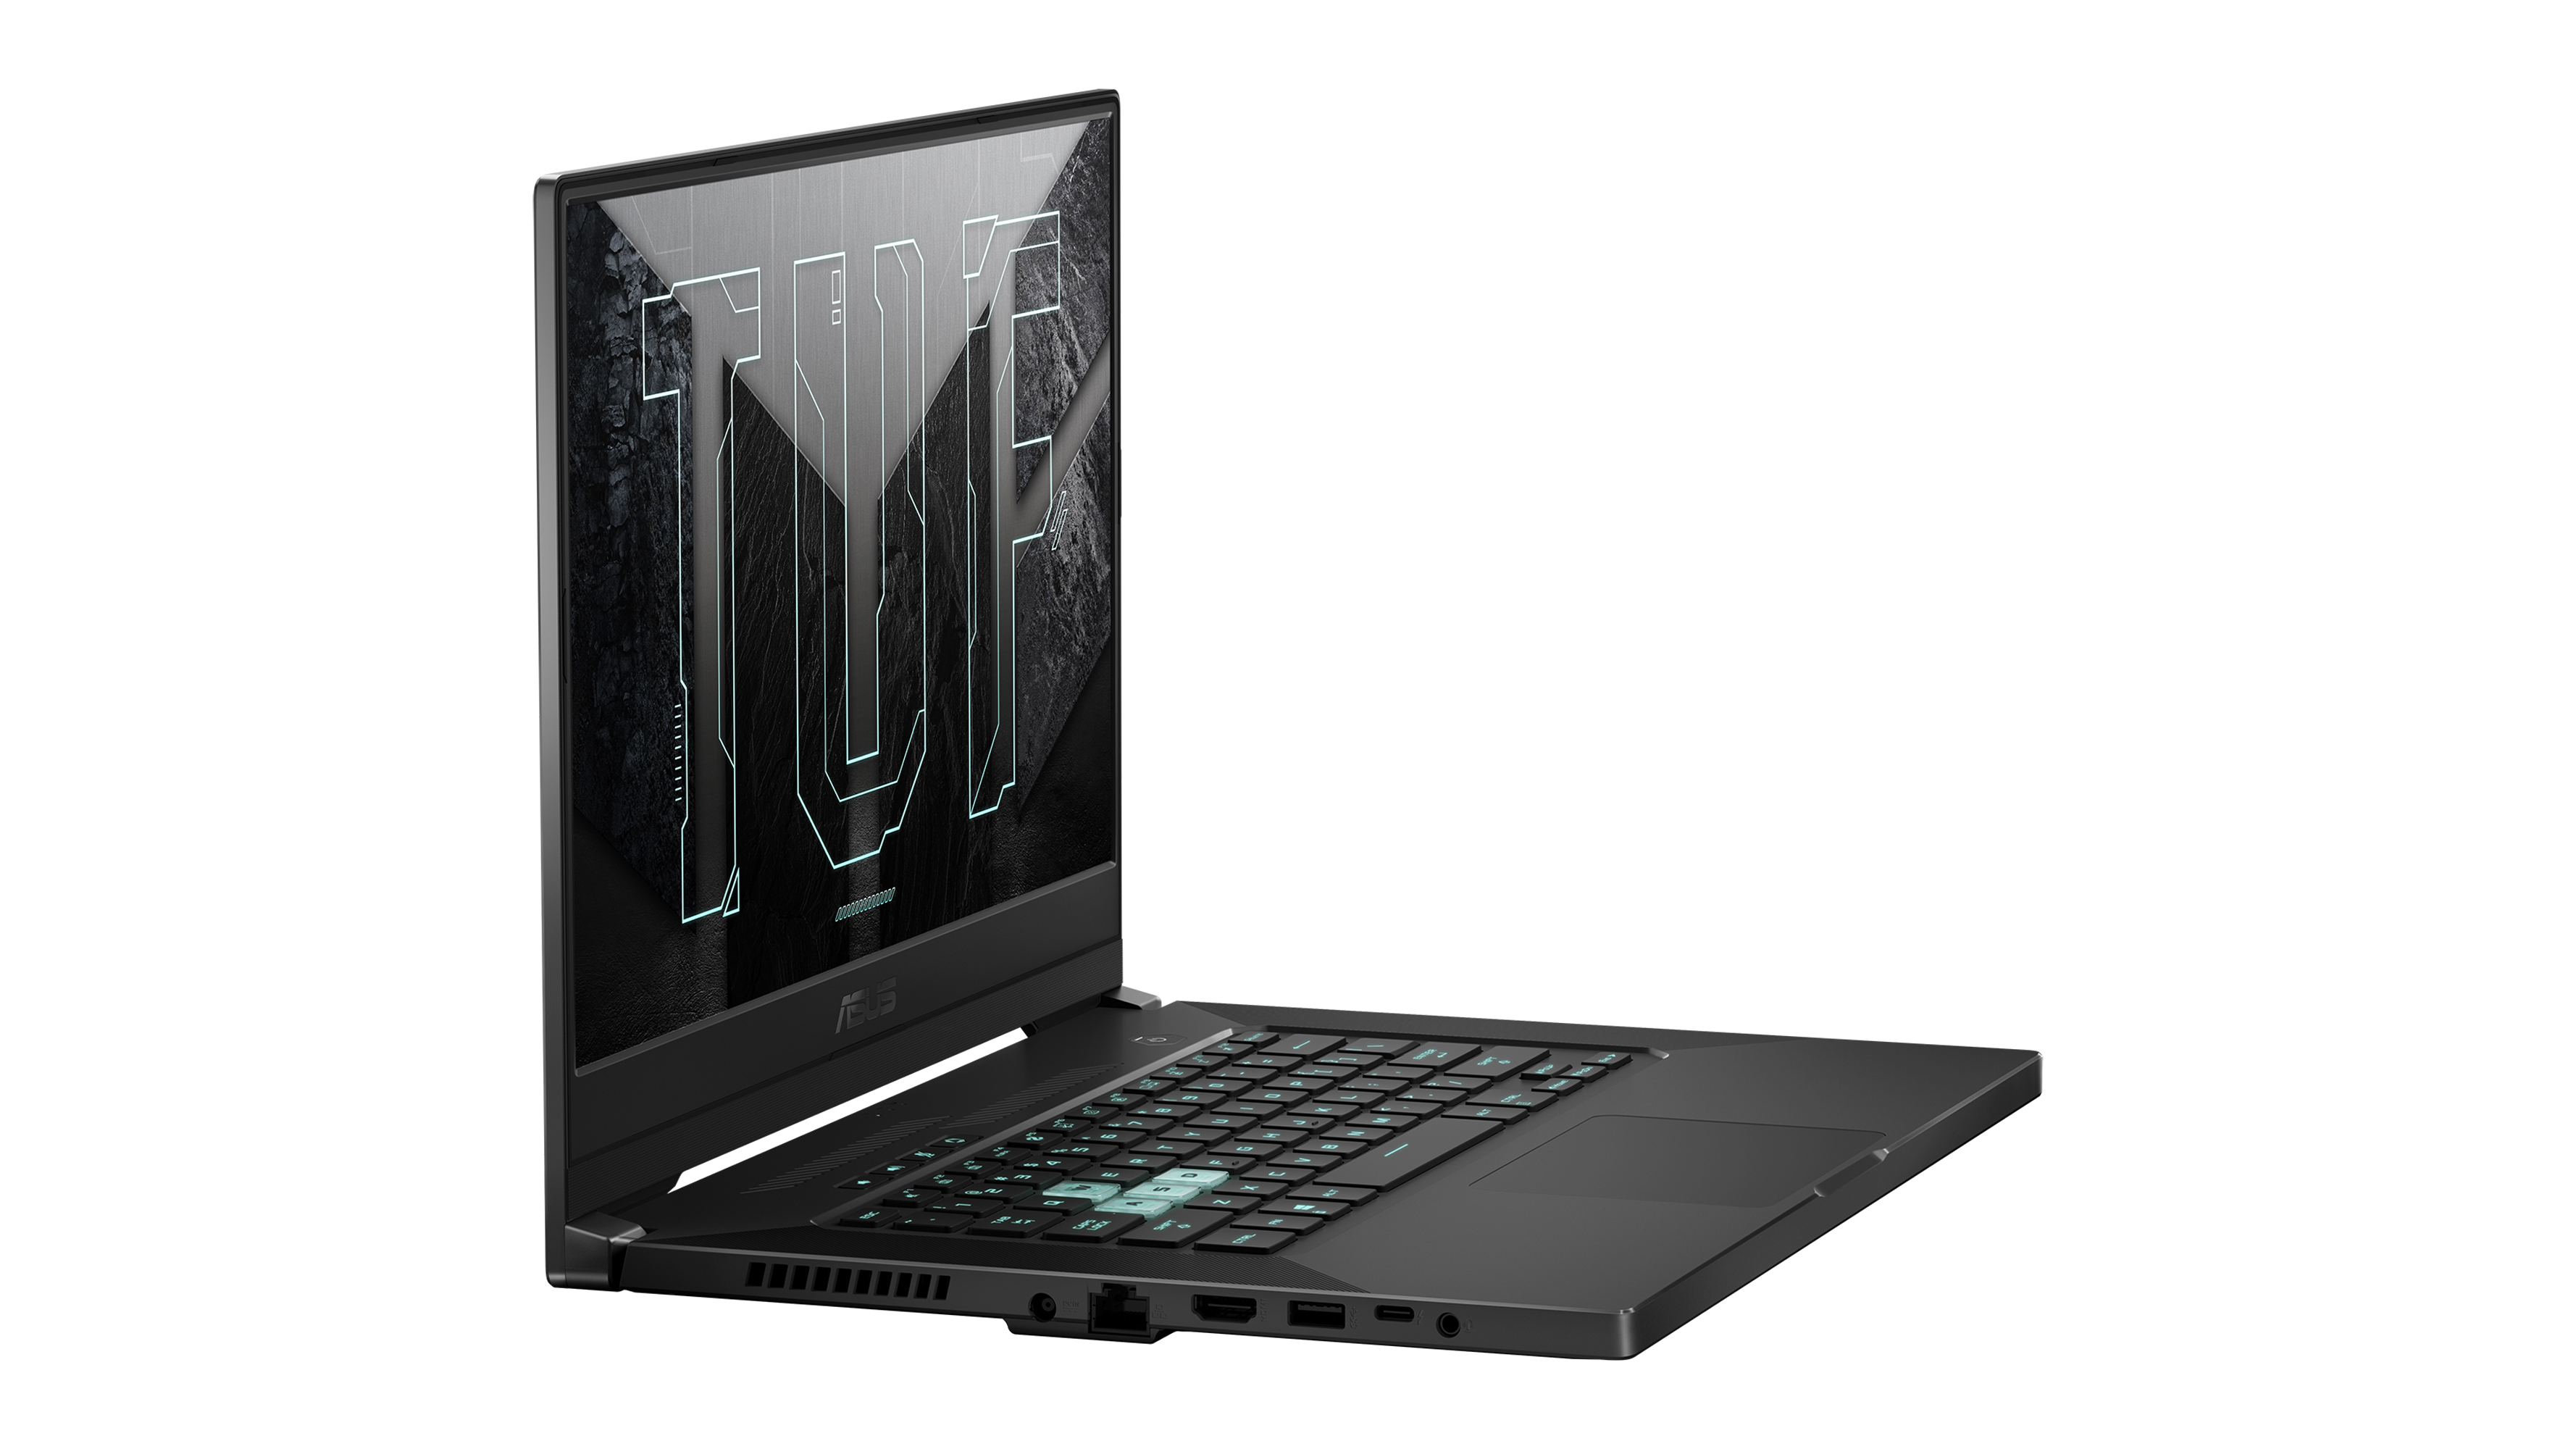 The Asus TUF Dash F15 from the side, where you can see the gaming laptop's left-side ports. There's an Asus TUF logo on the display.